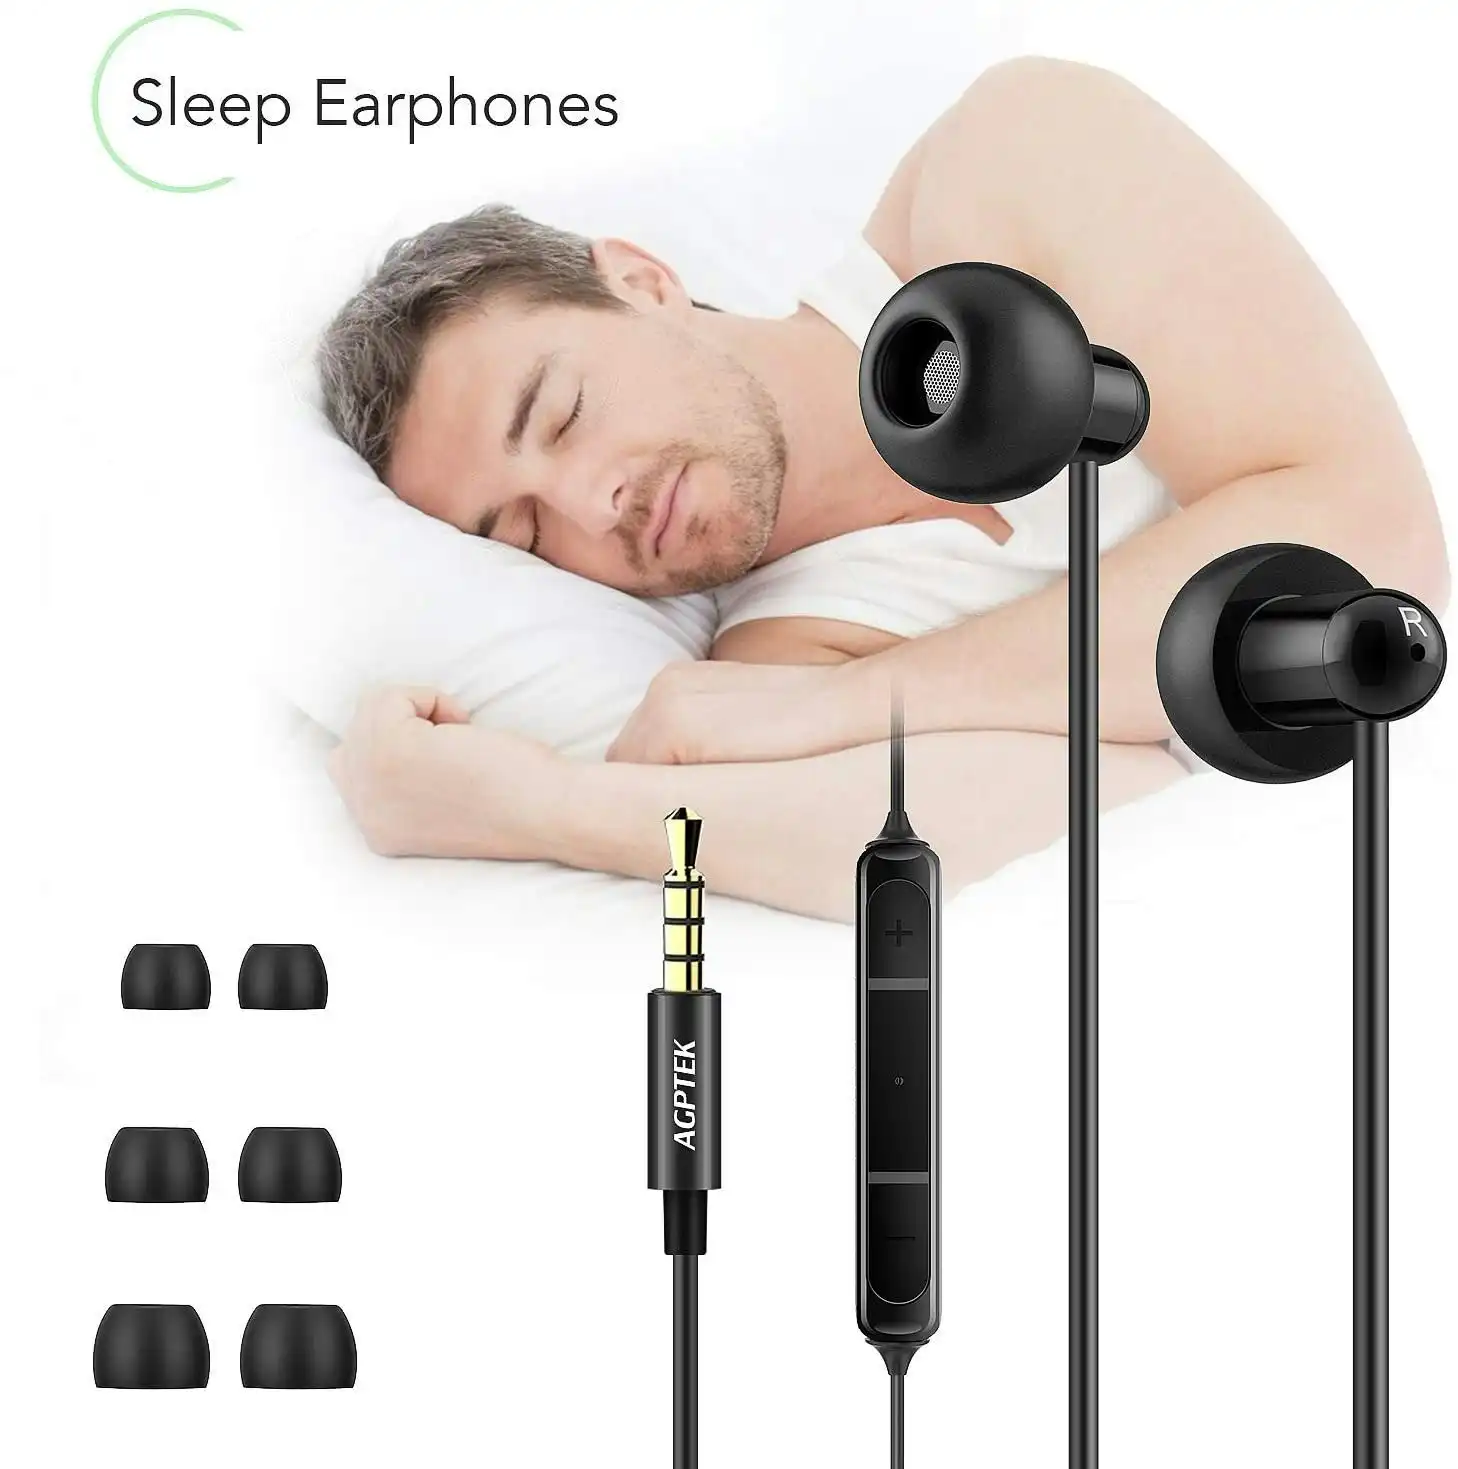 Agptek Sleep Earbuds, in-Ear Earphones for Sleeping 3 Sizes Ultra-Light Soft Silicone, Noise Isolating Perfect for Sleeping, Insomnia.